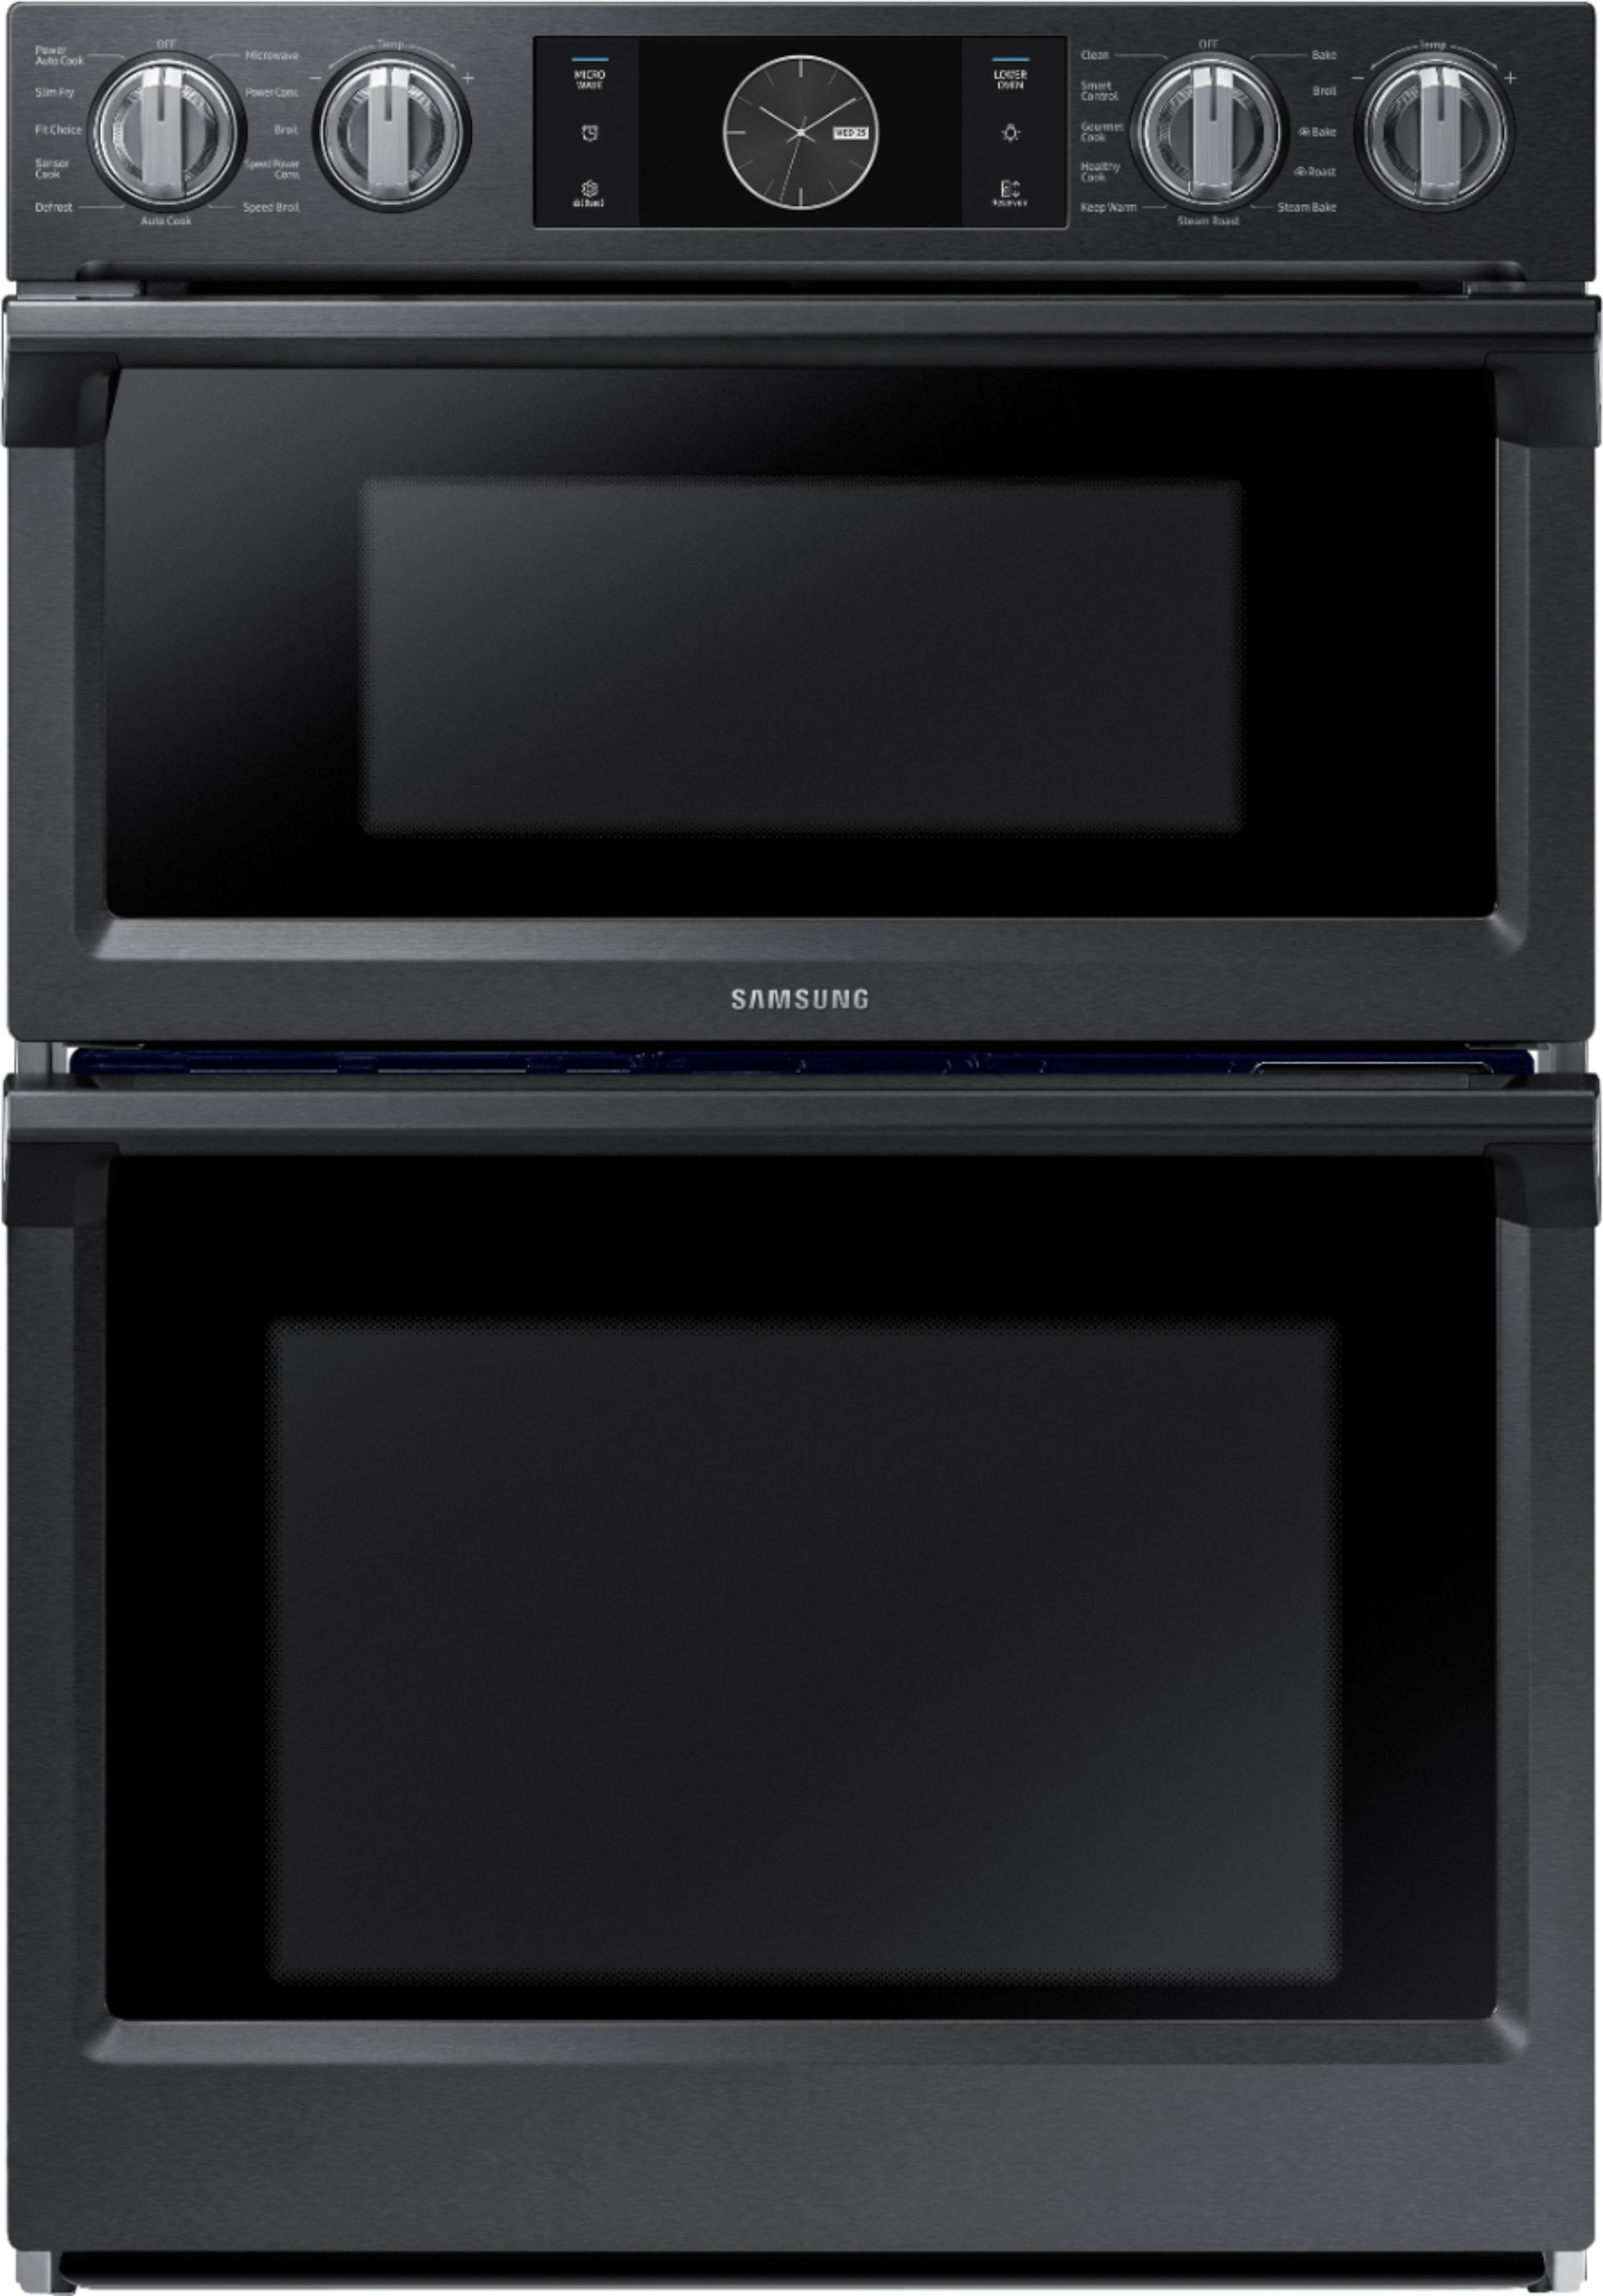 Samsung - 30" Microwave Combination Wall Oven with Flex Duo, Steam Cook and WiFi - Black stainless steel